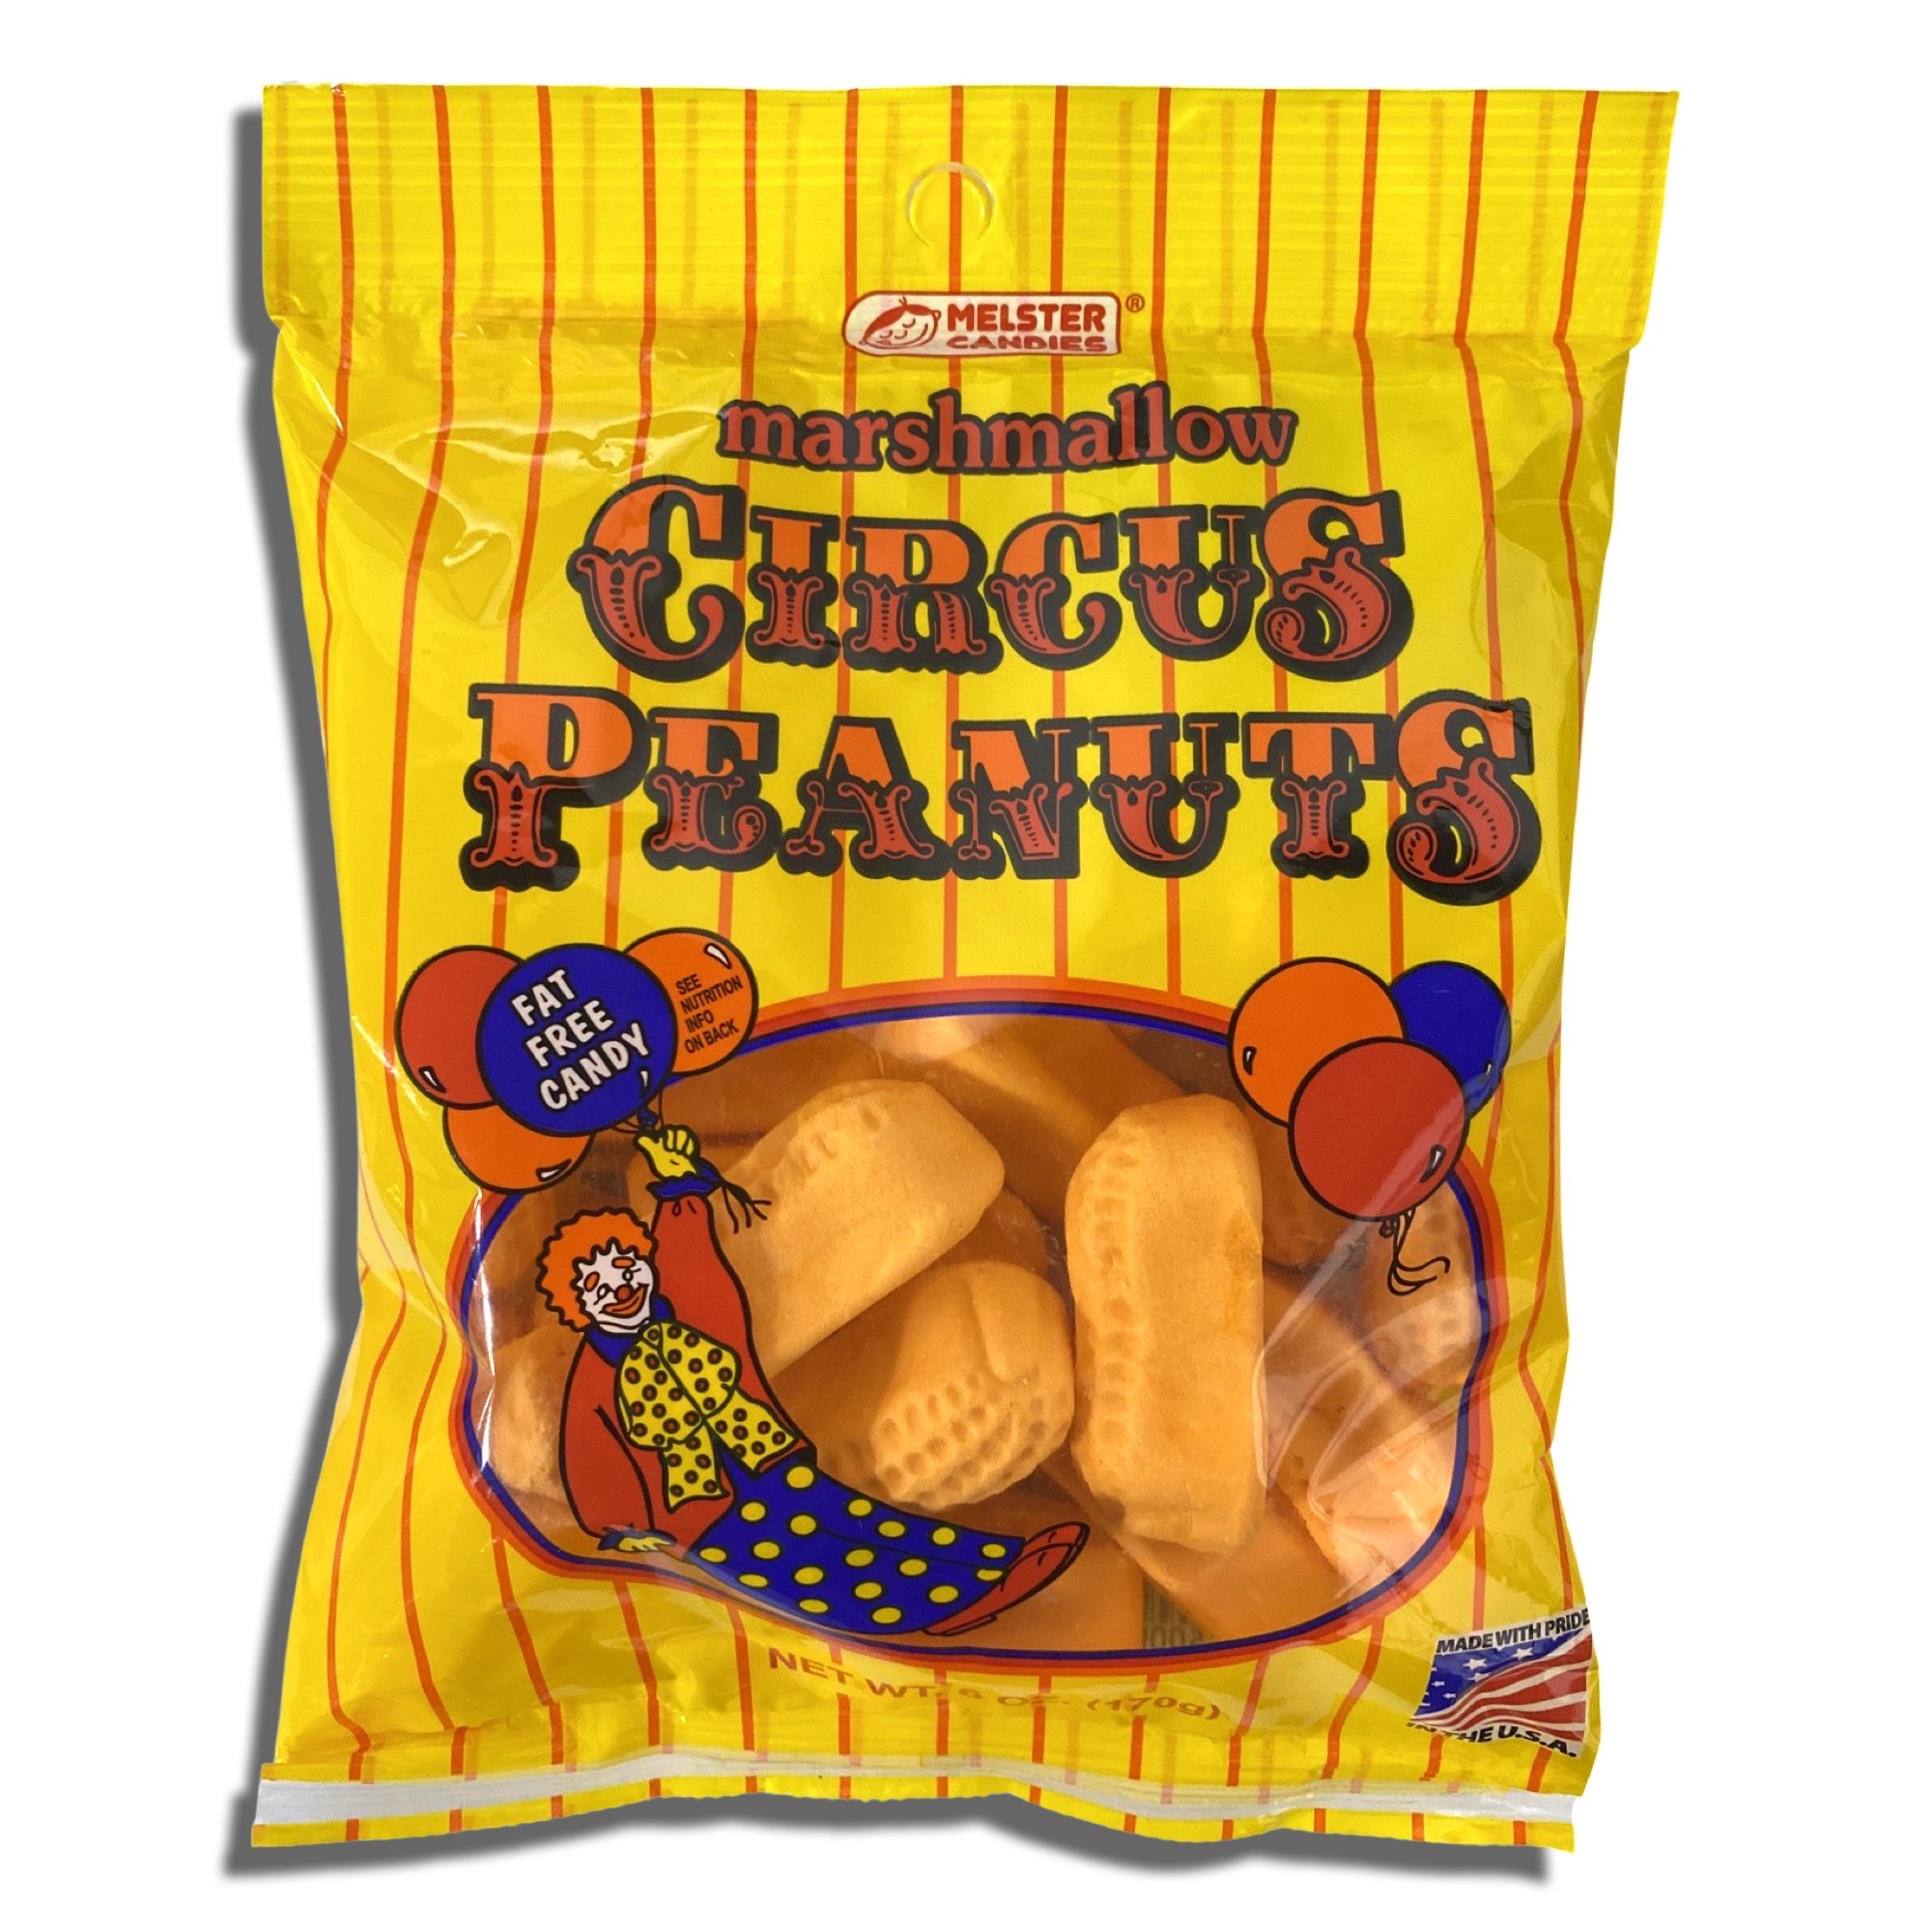 Marshmallow Circus Peanuts by Melster Bundled by Tribeca Curations | 6 Oz | Value Case Pack of 12 bags - image 5 of 5